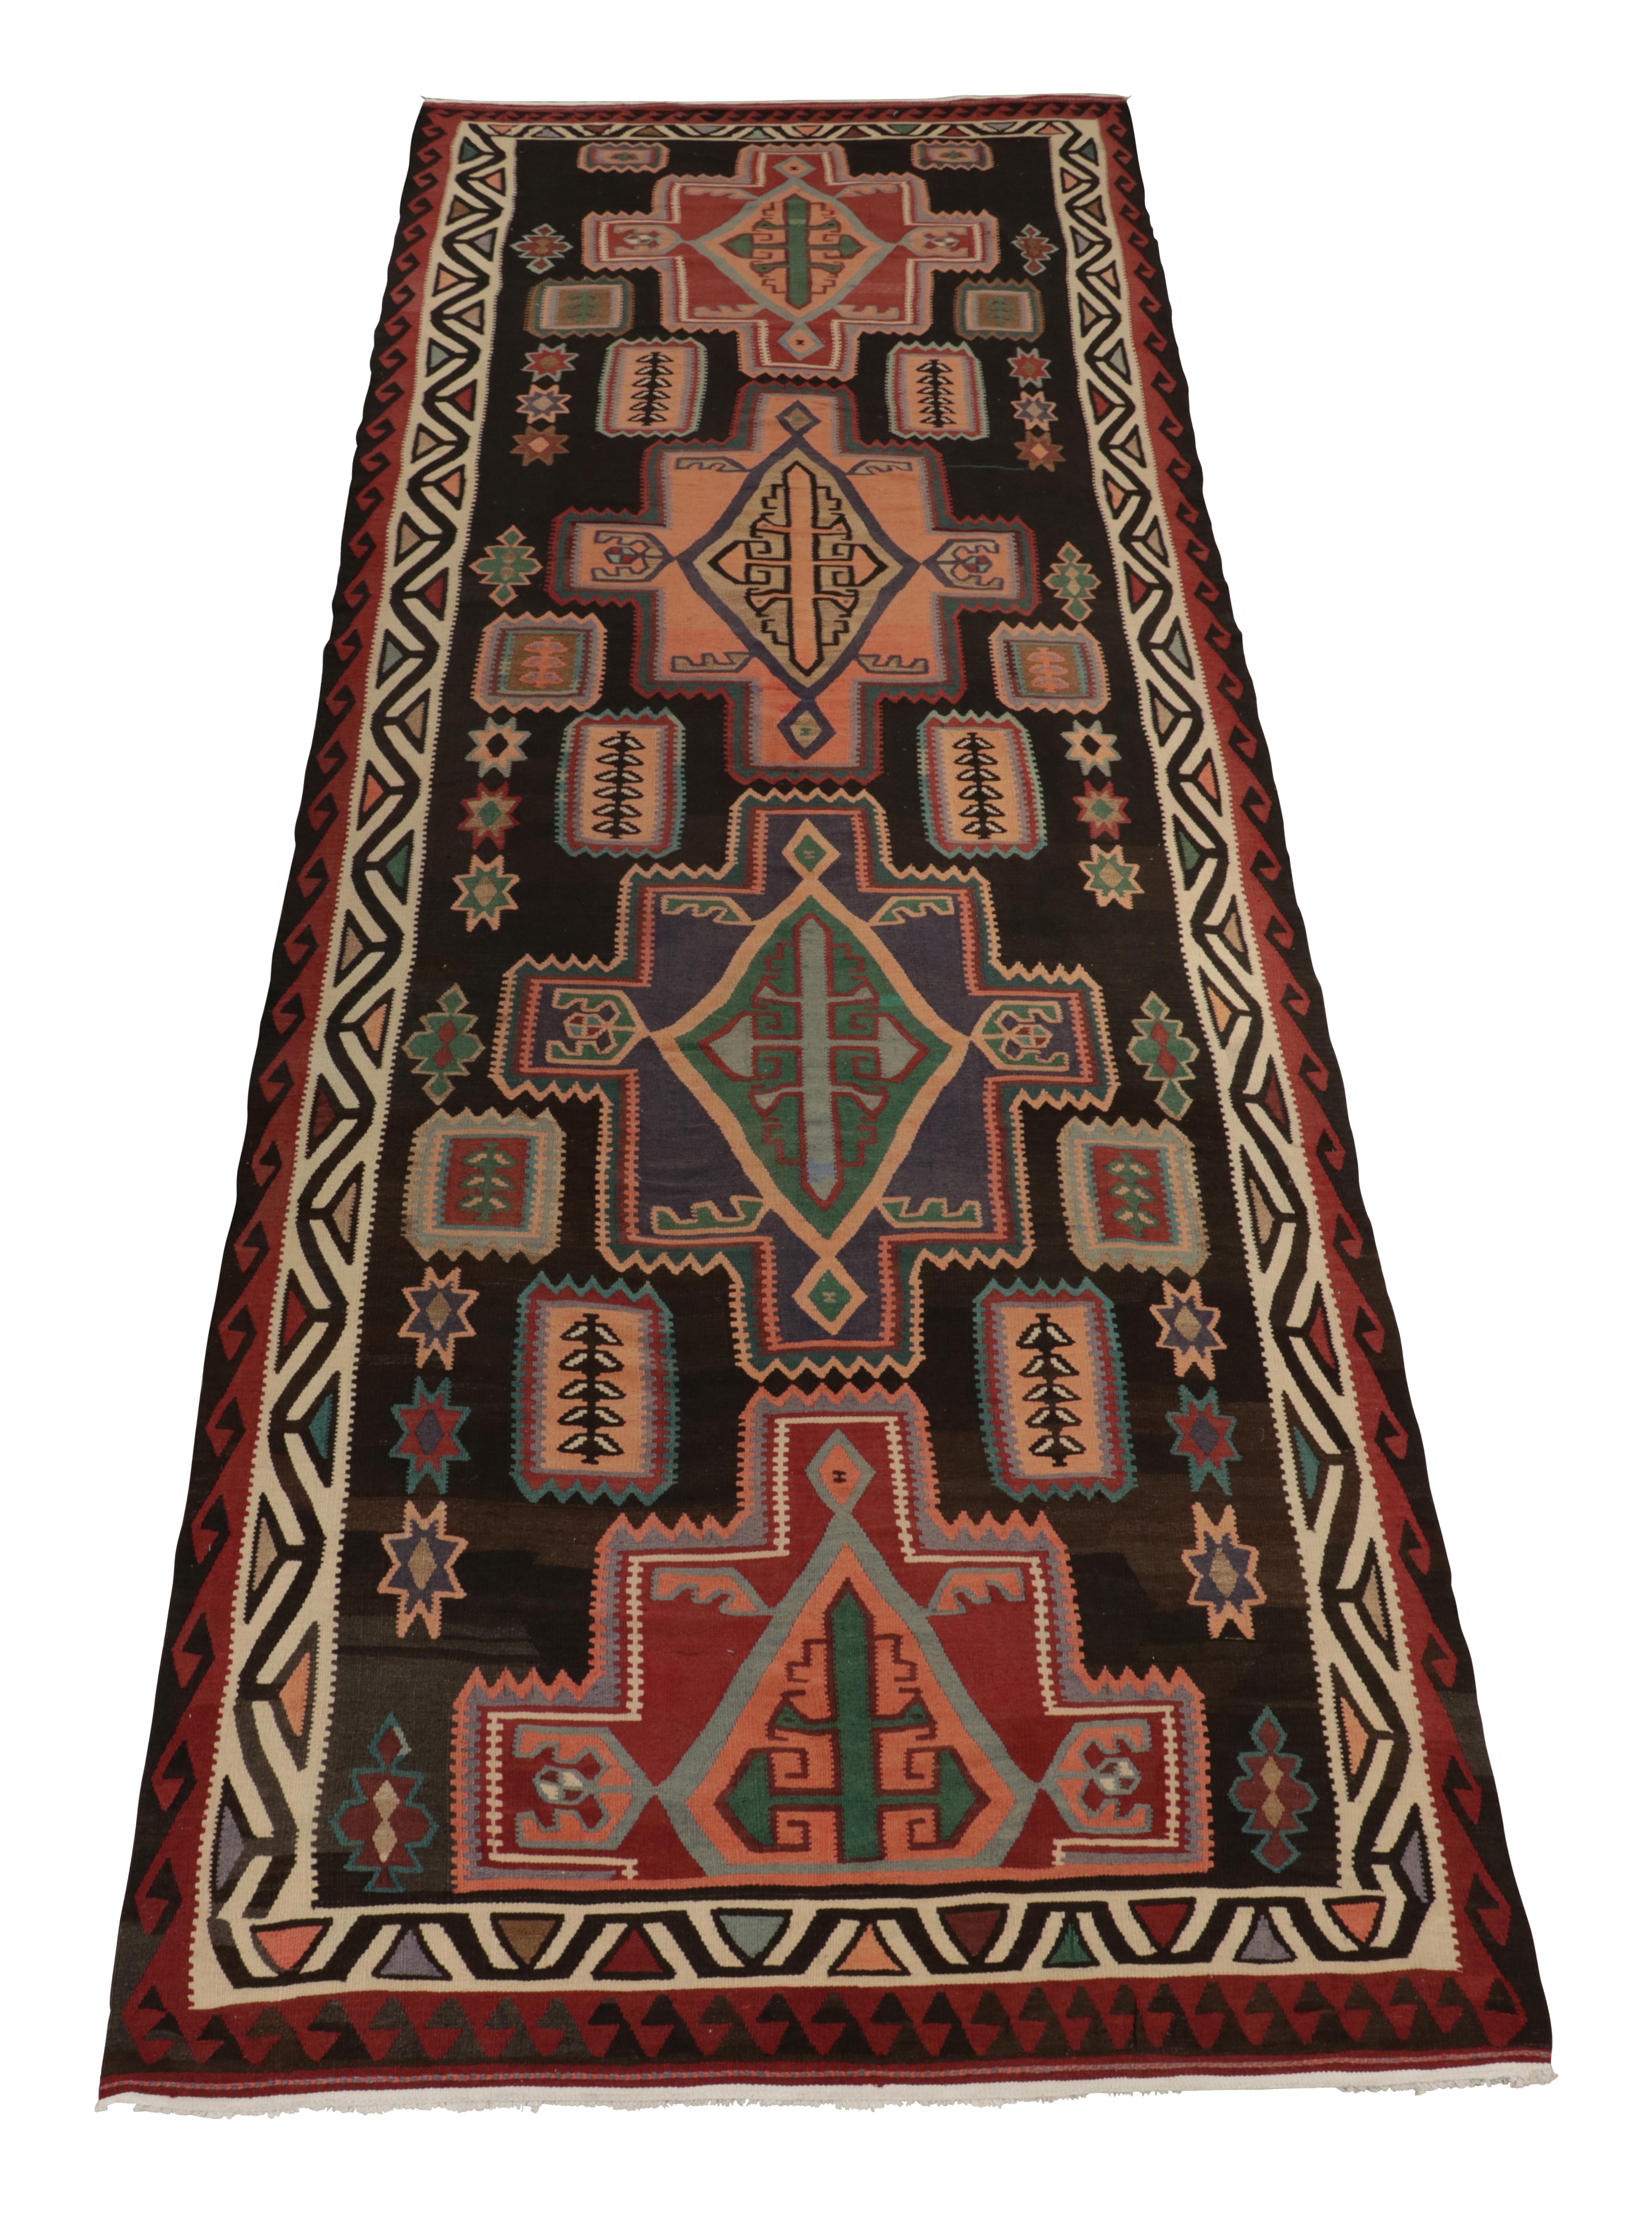 This vintage 7x19 Persian kilim is a rare tribal rug for its size and style alike. Handwoven in wool, it originates circa 1950-1960.

Further on the Design:

The design prefers a vibrant range of colors in its medallion and geometric patterns on